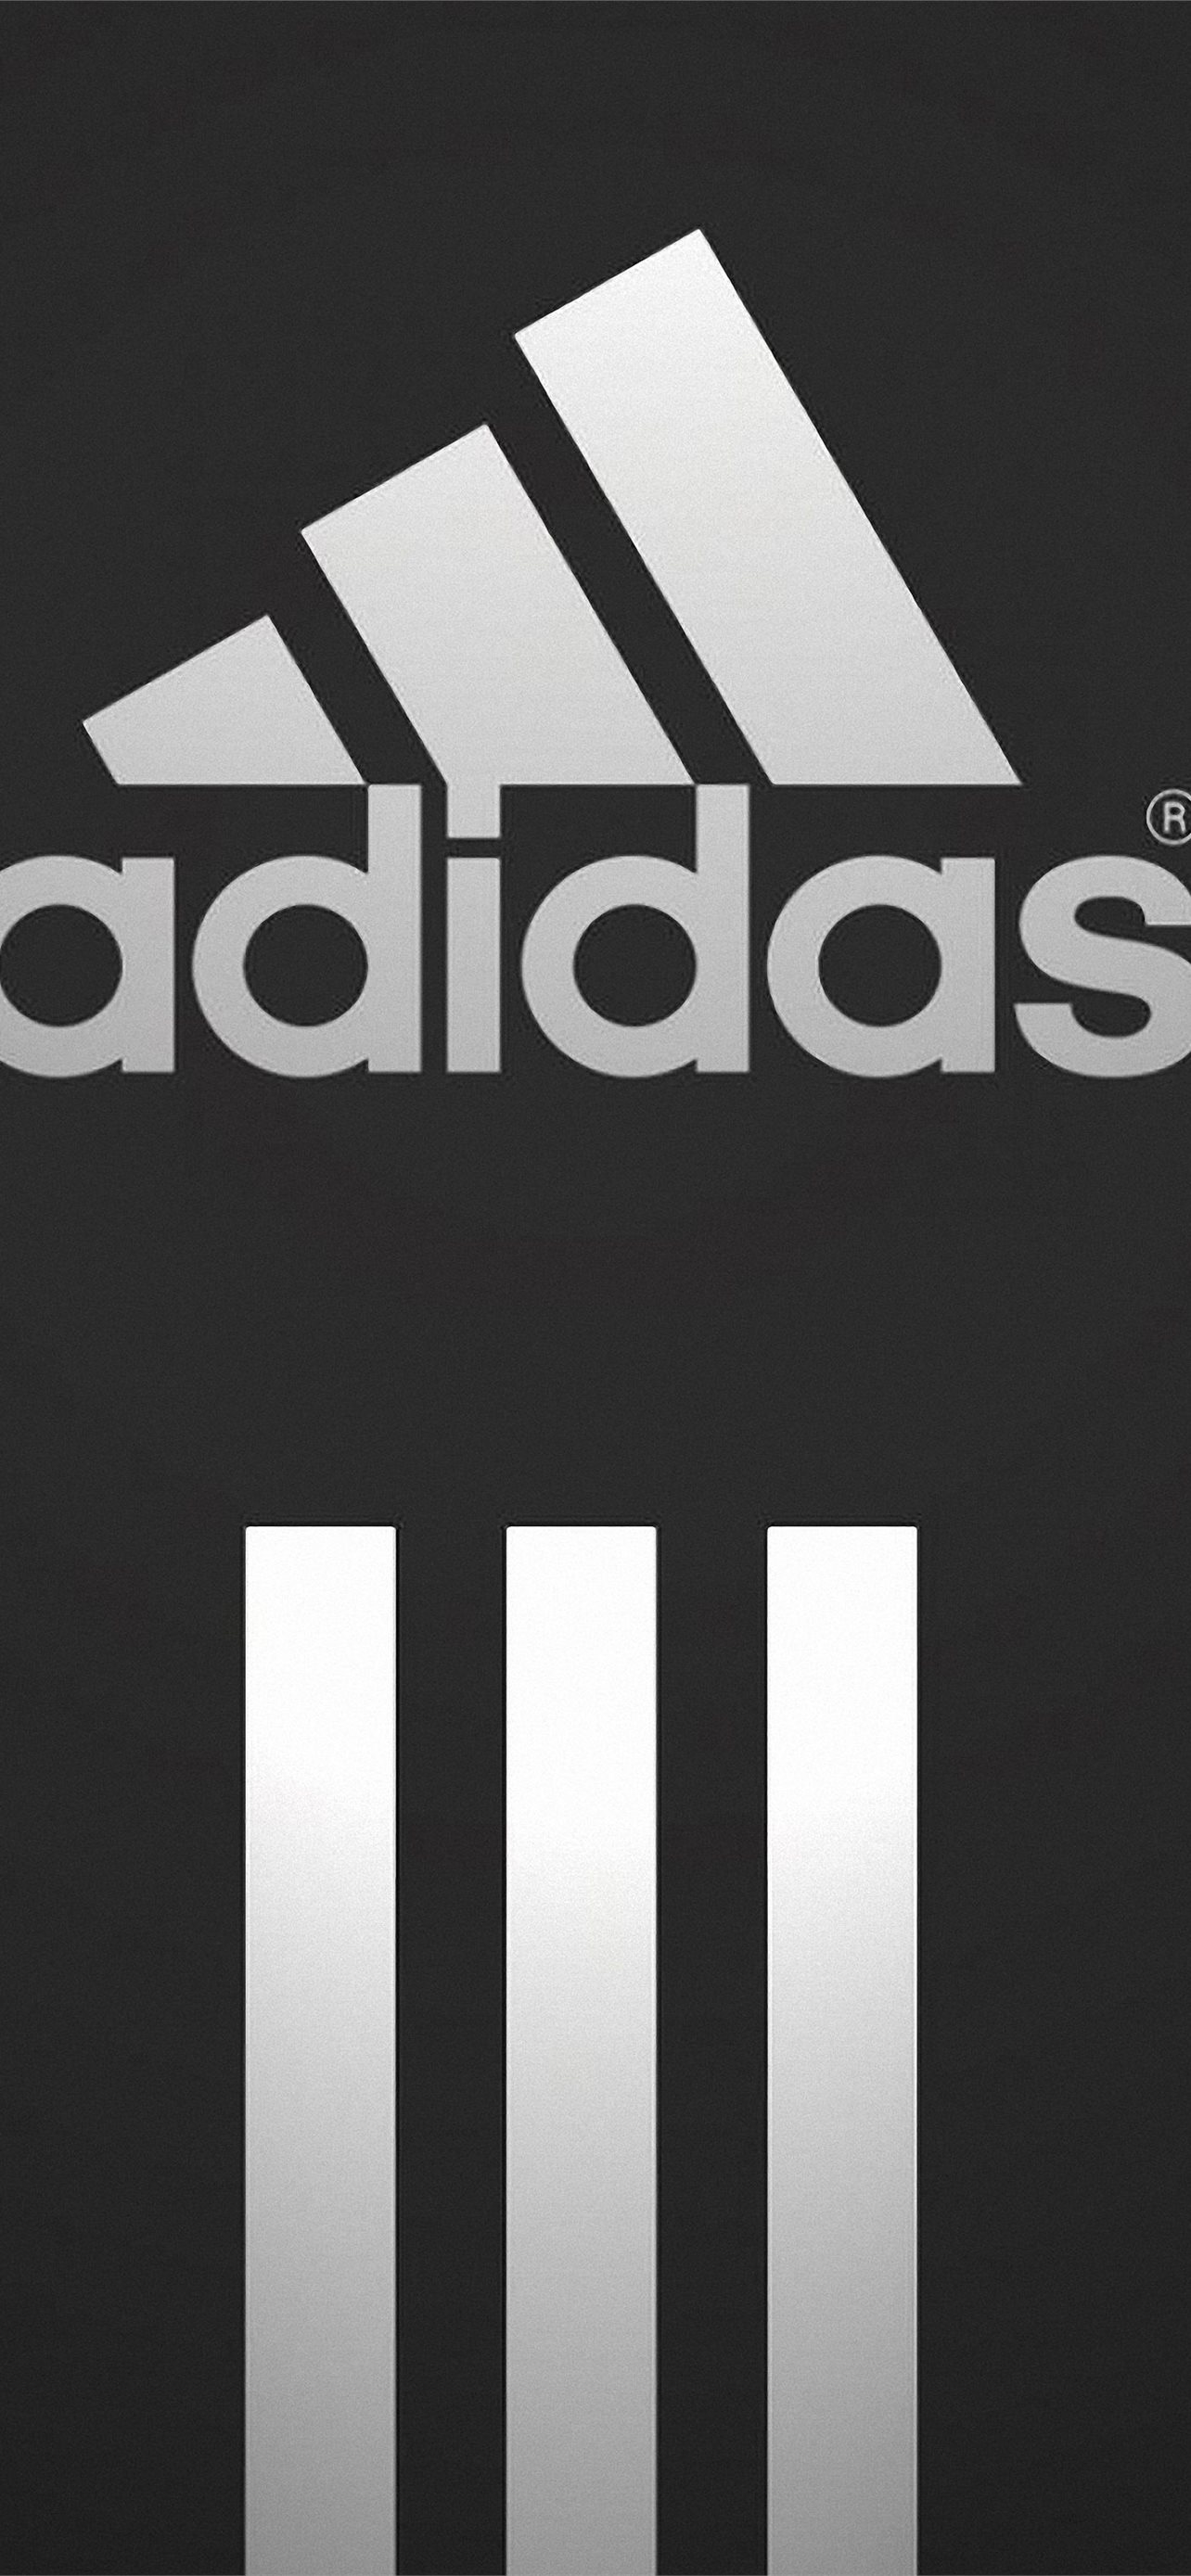 Wallpaper ID: 440101 / Products Adidas Phone Wallpaper, Product, Sport,  750x1334 free download